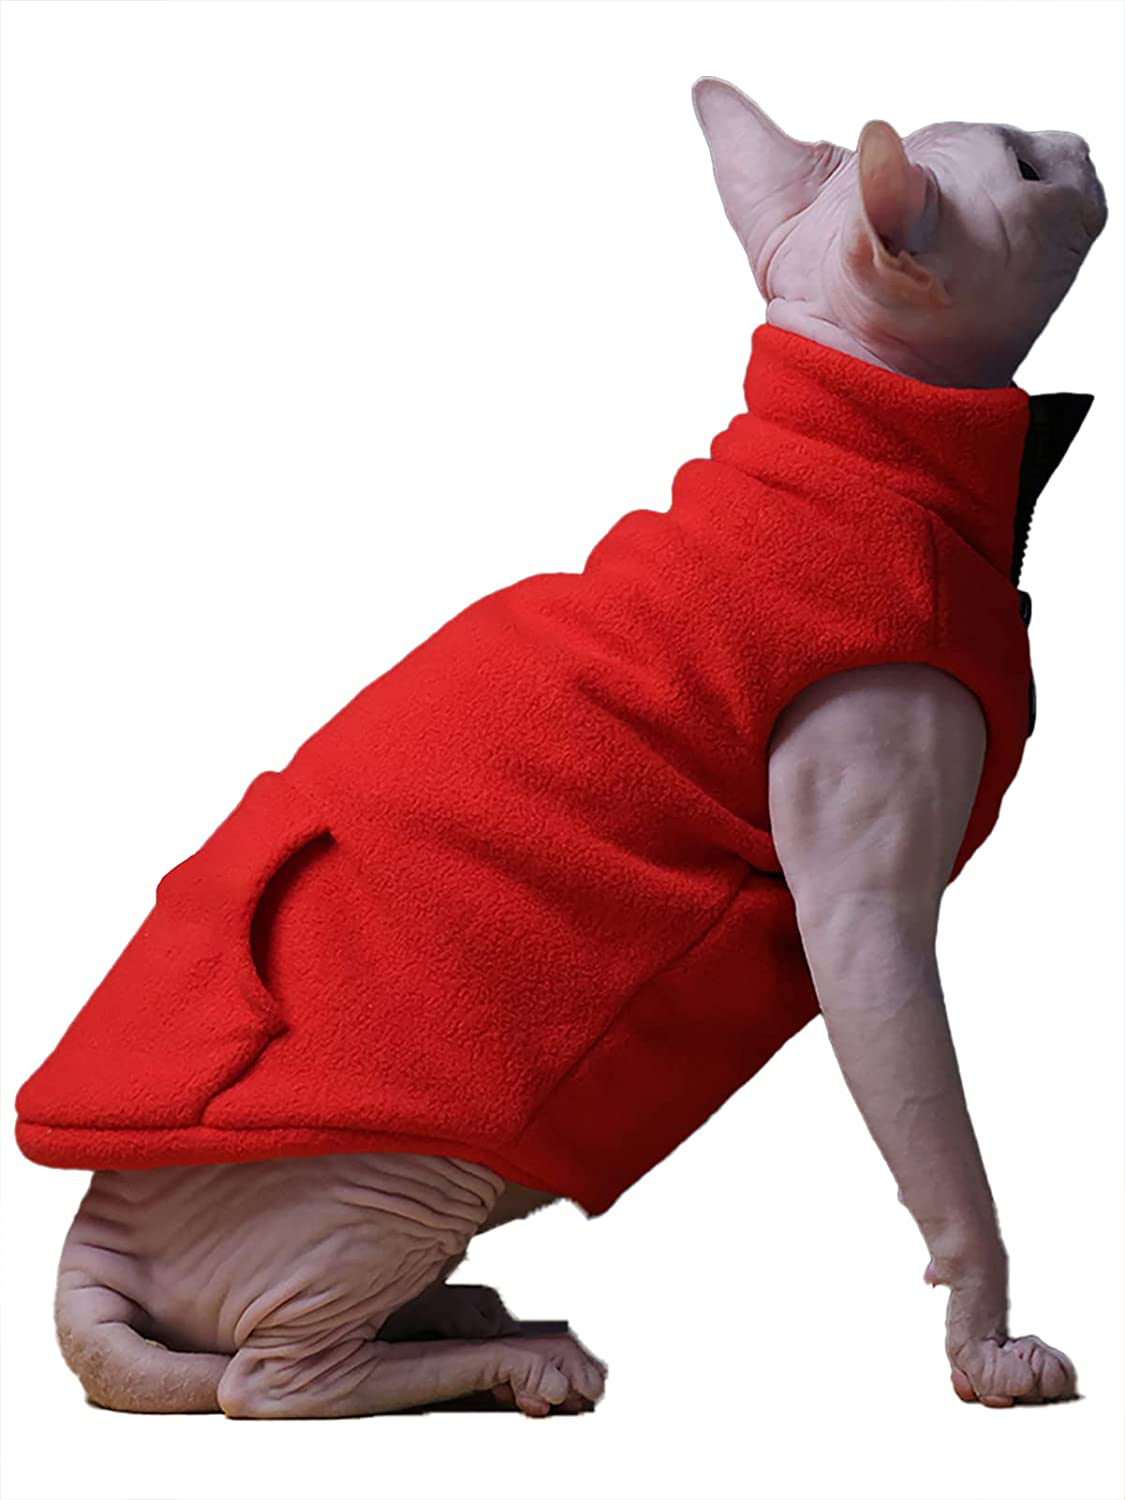 Sphynx Hairless Cat Clothes Autumn Winter Fashion Solid Color Zipper Coat Sleeveless High Collar Soft Faux Fur Sweater Outfit with Pocket Animals & Pet Supplies > Pet Supplies > Cat Supplies > Cat Apparel WQCXYHW Red L（6.6-8.8lbs） 